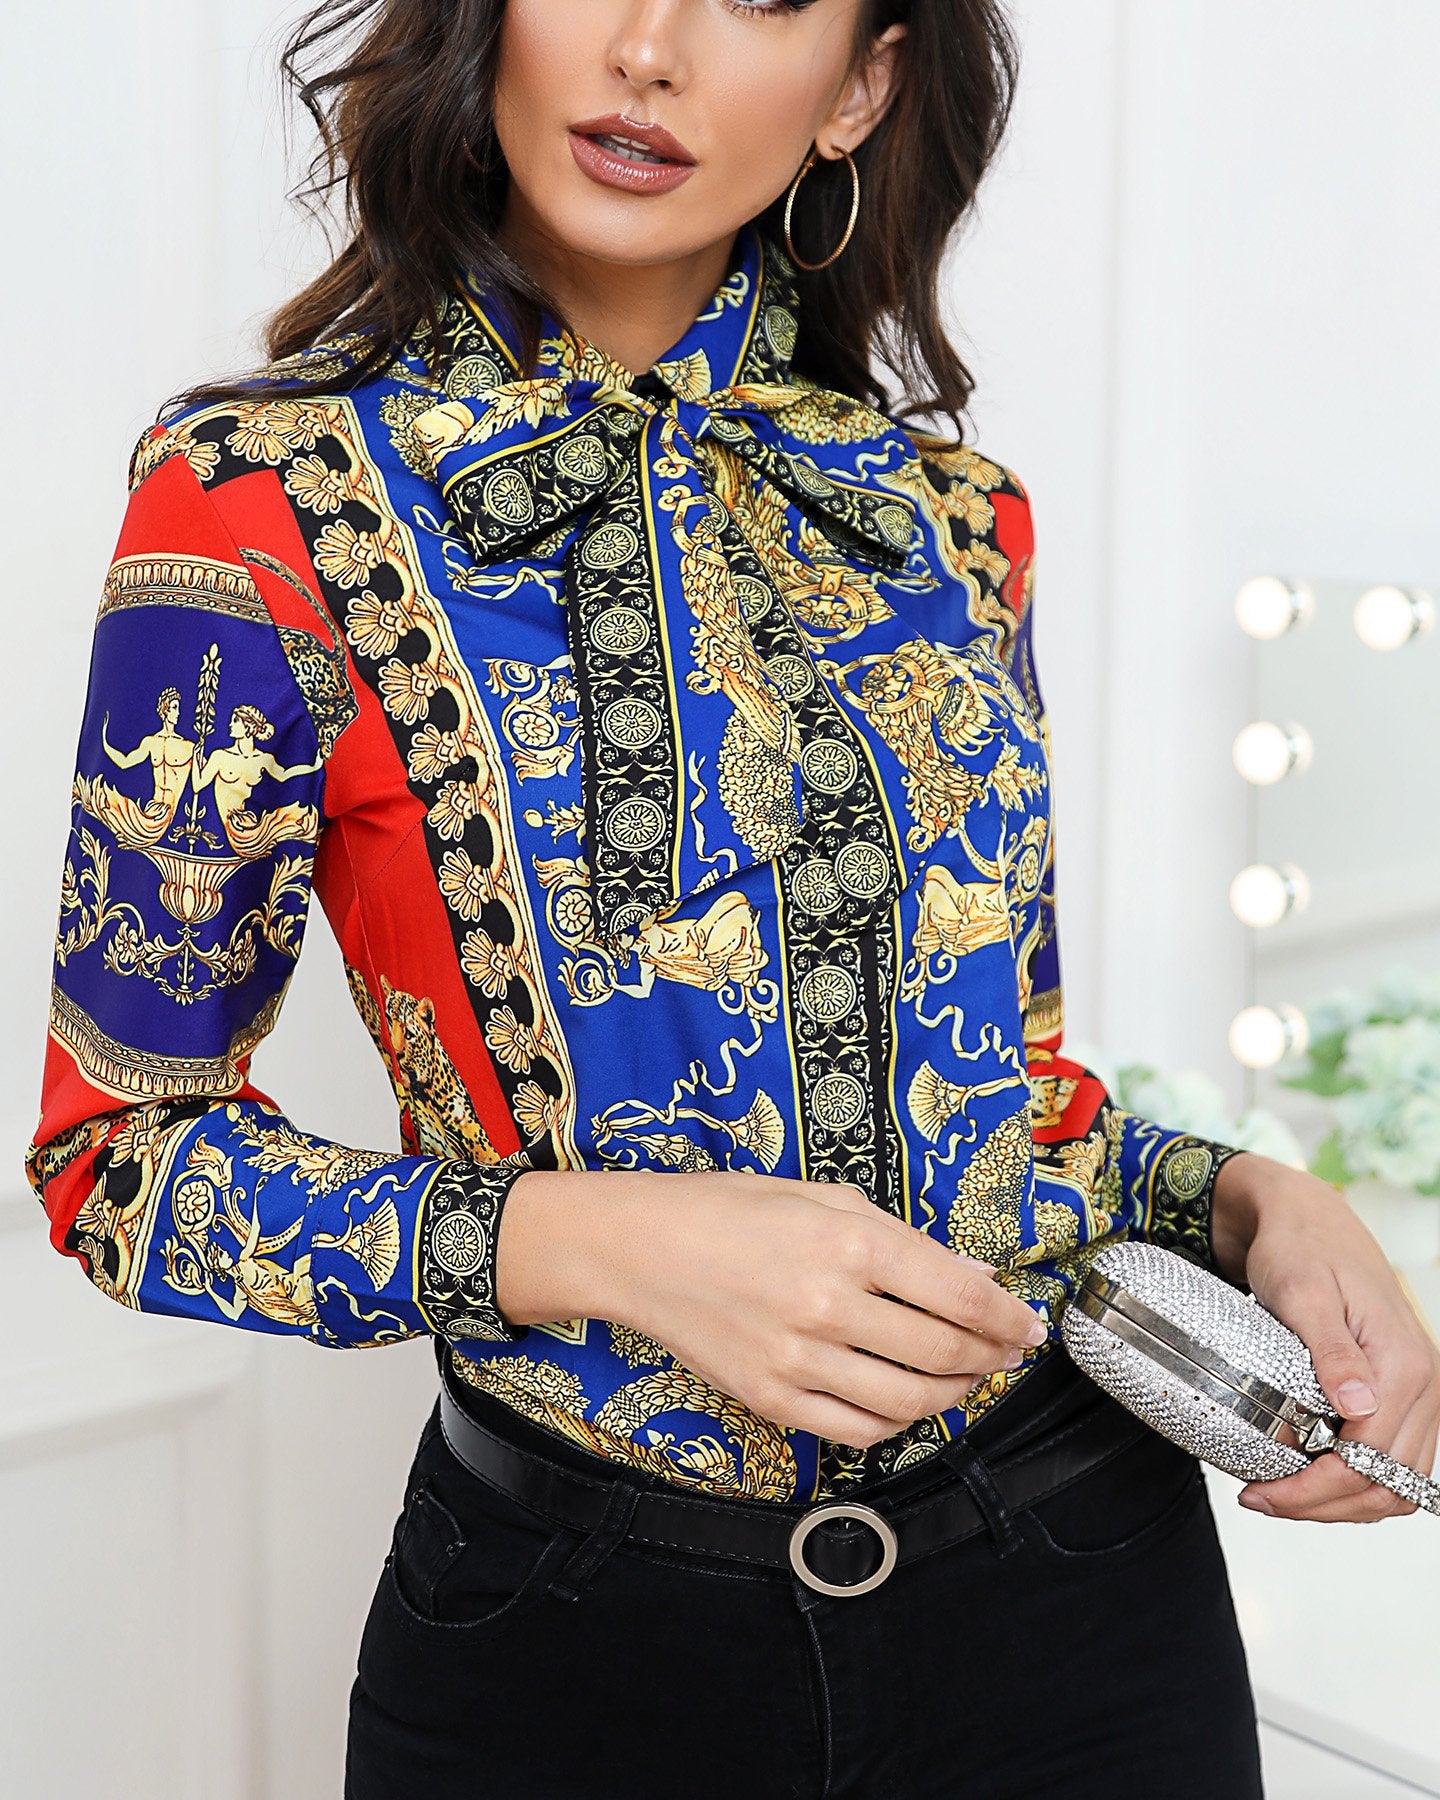 Outlet26 Retro Ethnic Print Long Sleeve Shirt MultiStyle